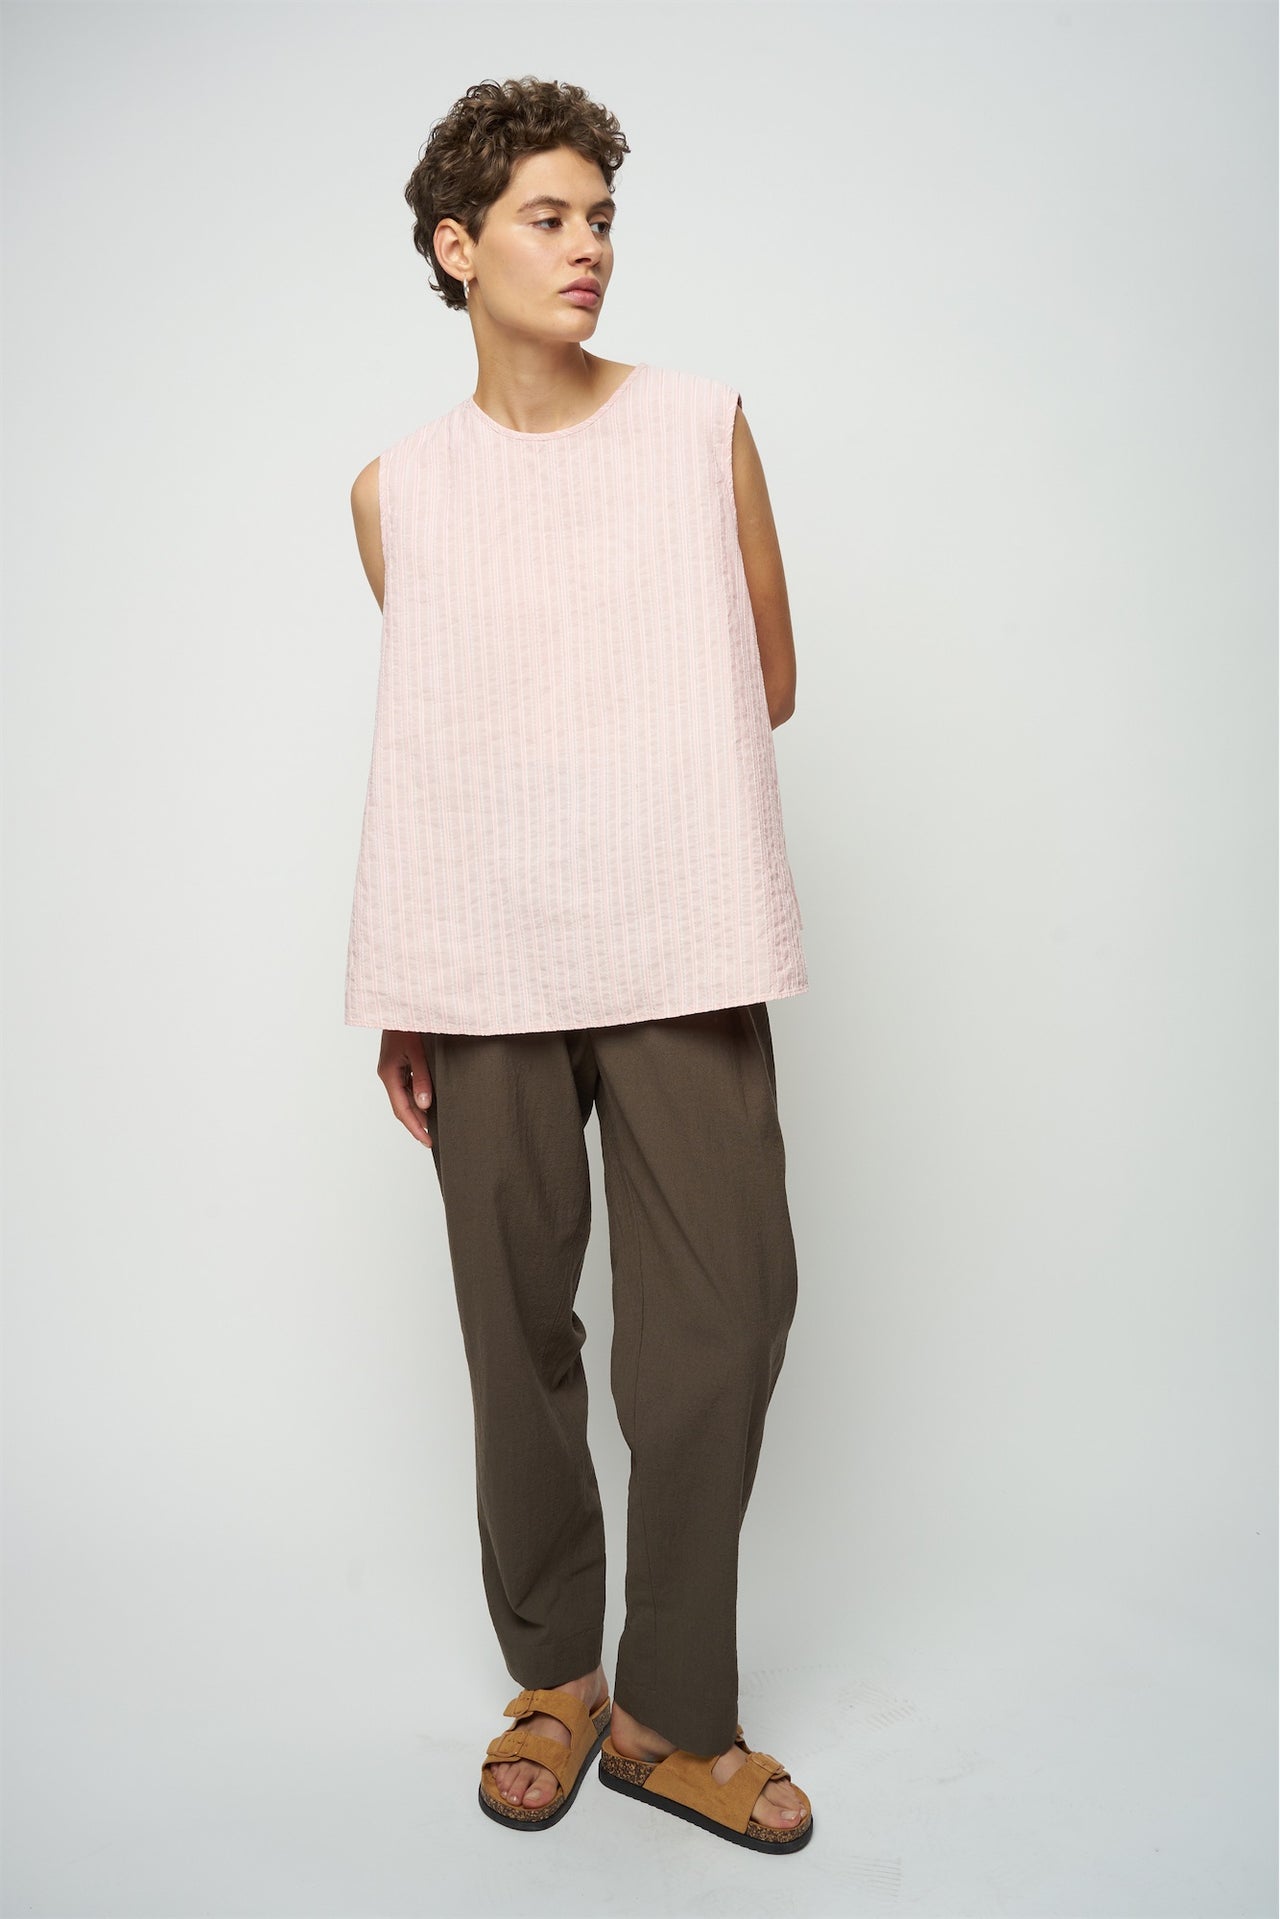 Top in a Subtle Pink Striped Structural Italian Cotton